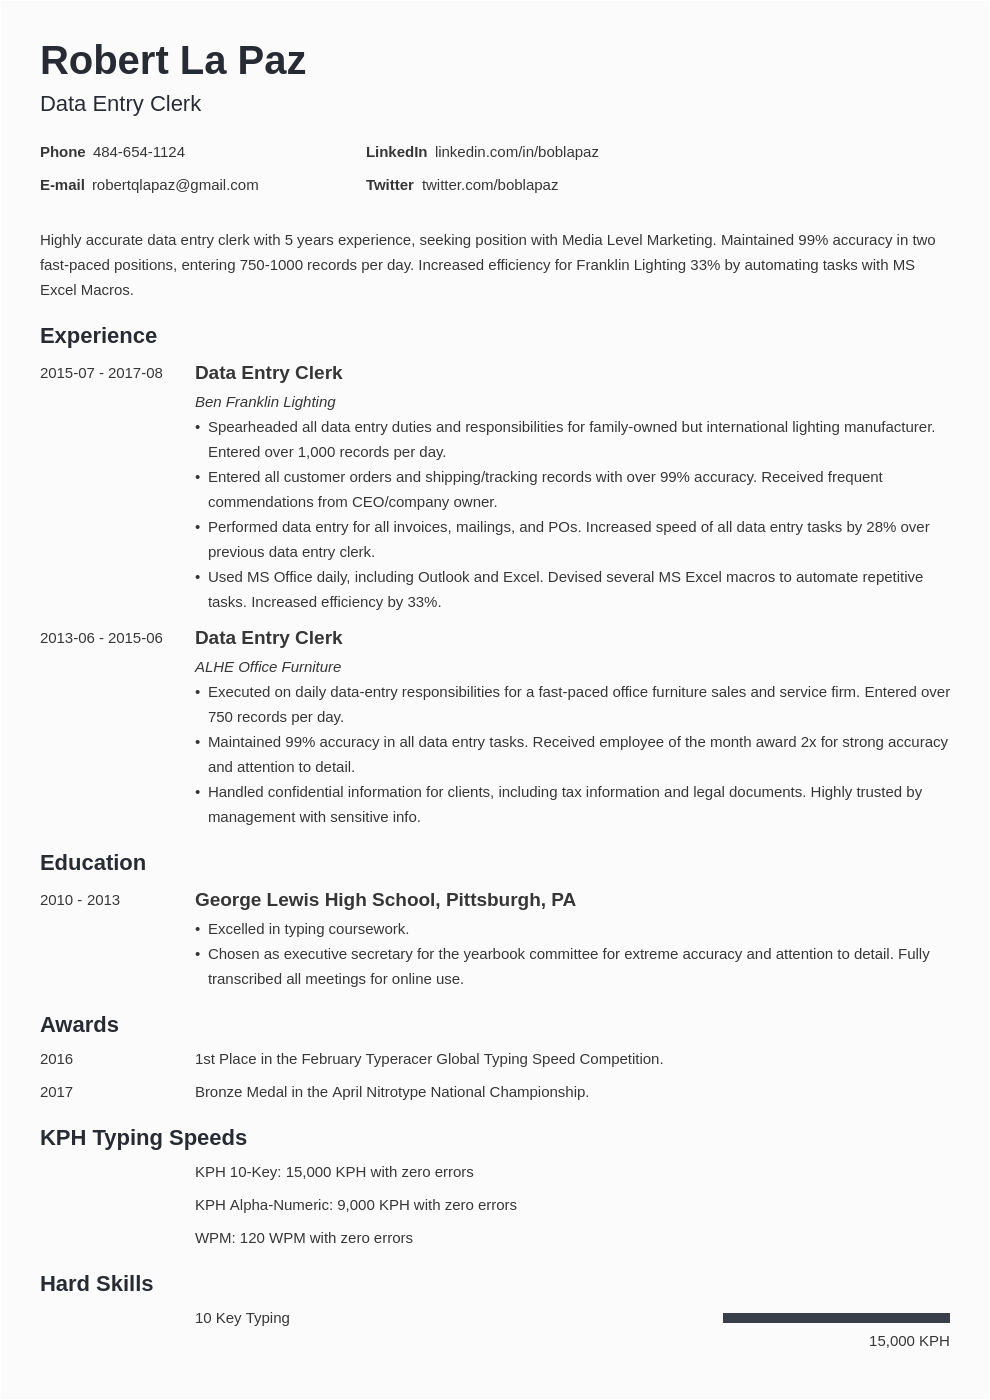 Data Entry Resume Sample with Experience Data Entry Resume Sample 20 Tips On Experience & Skills